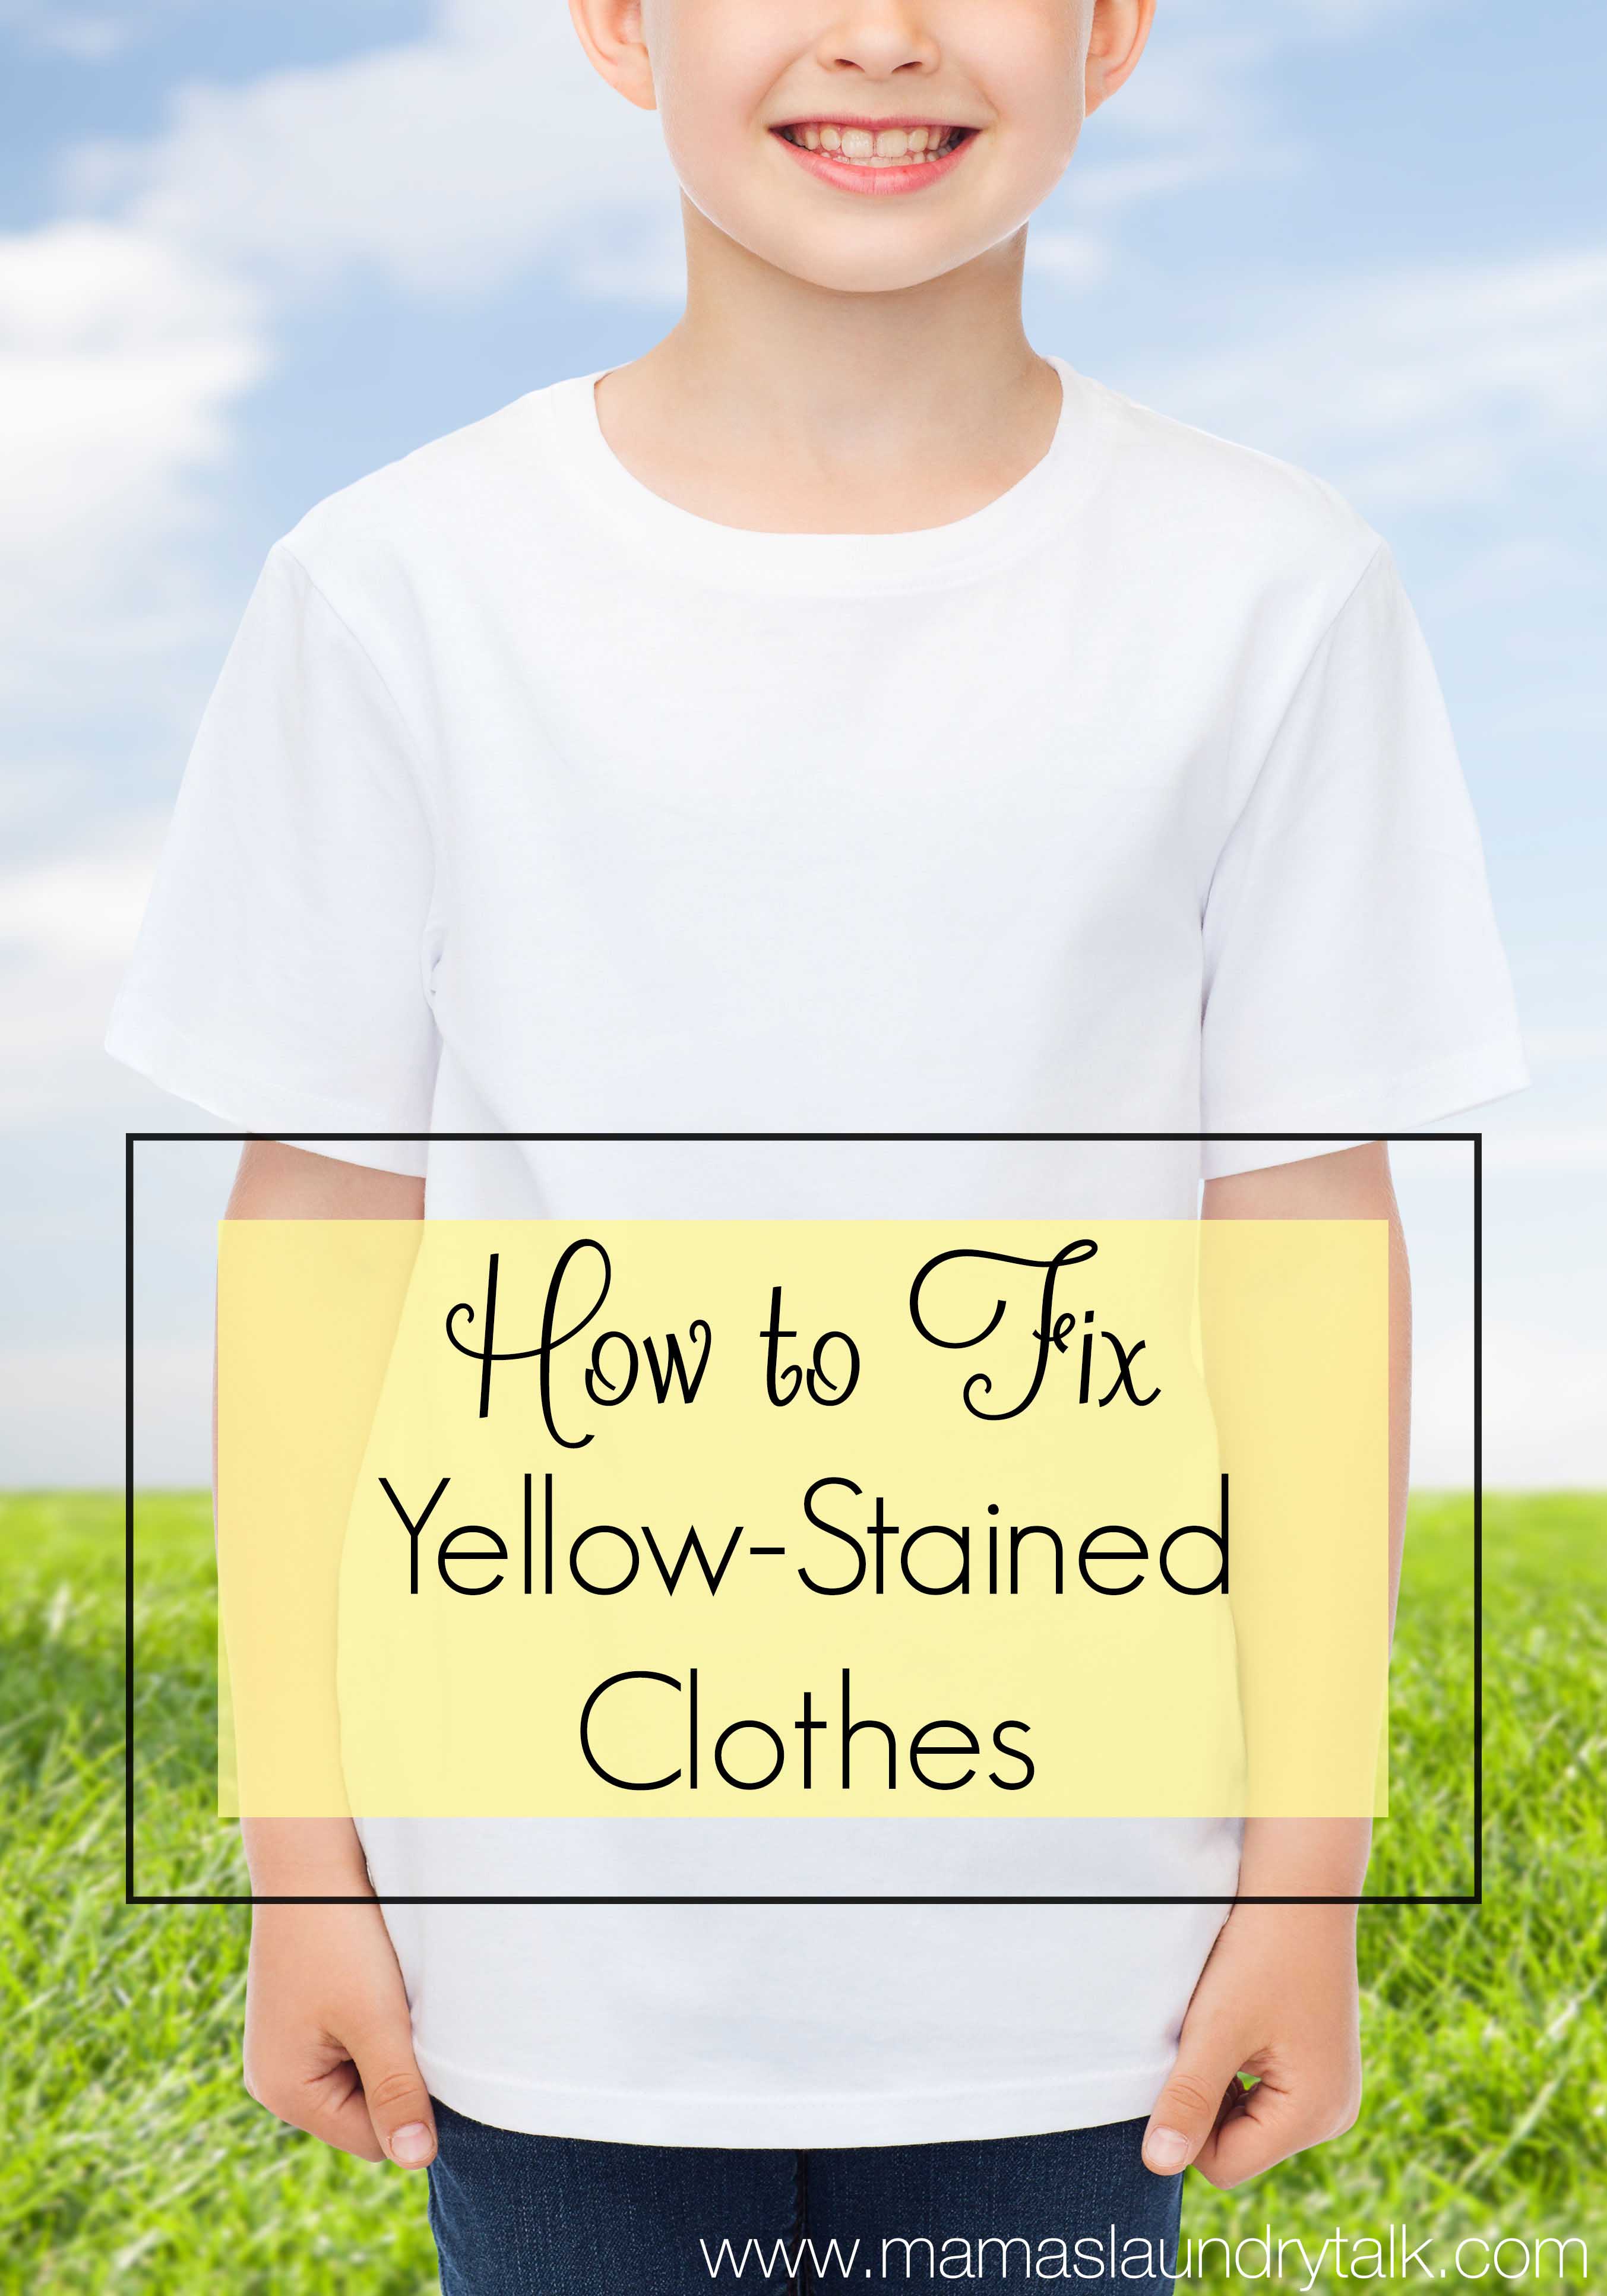 Have Your White Clothes Turned Yellow? Mama's Laundry Talk